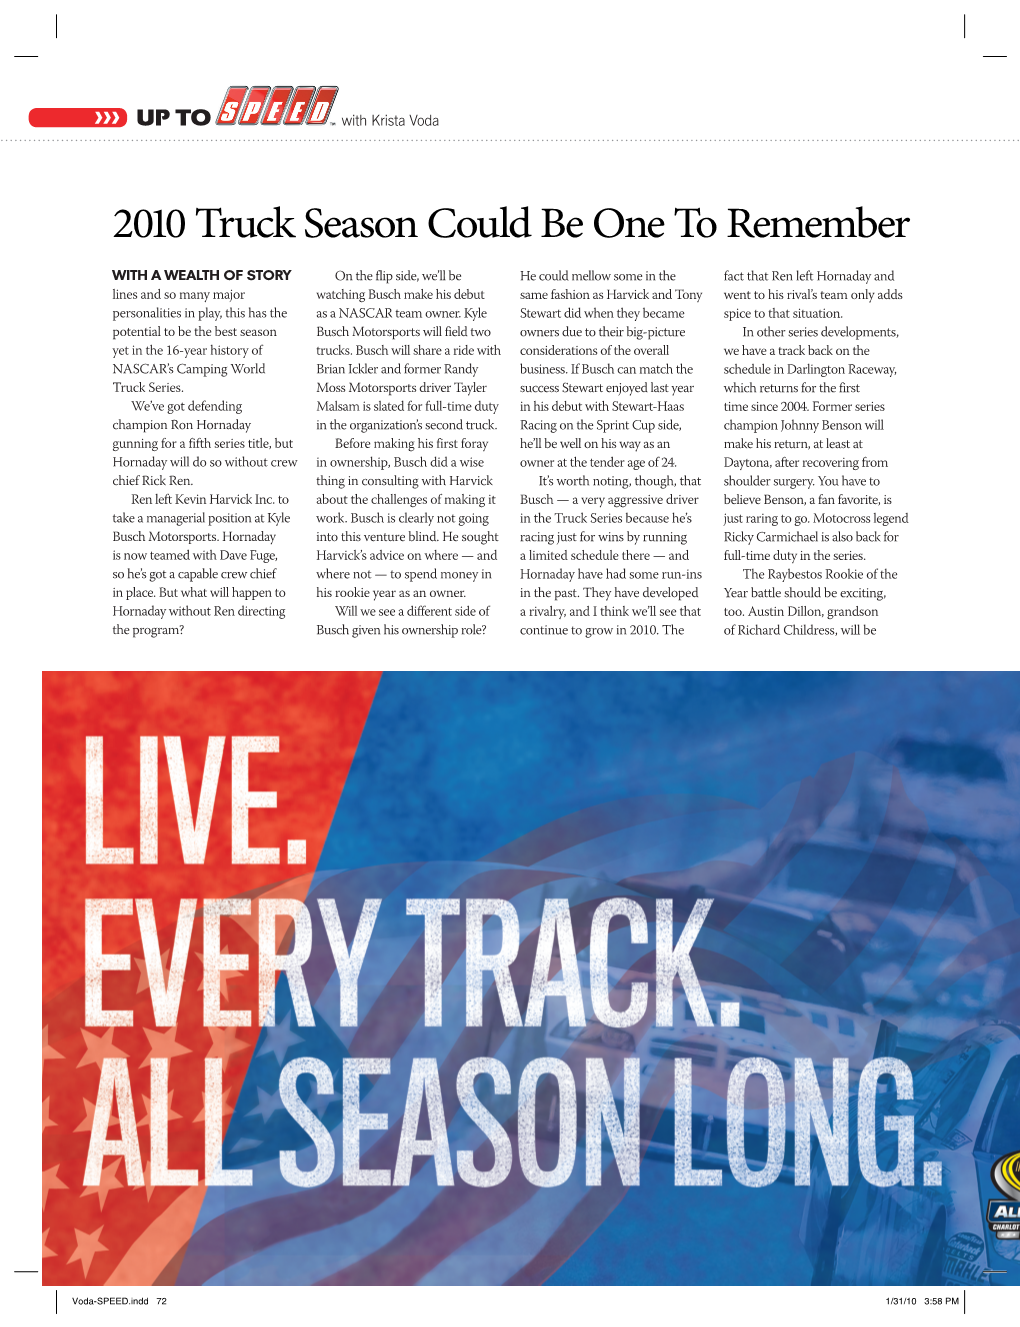 2010 Truck Season Could Be One to Remember